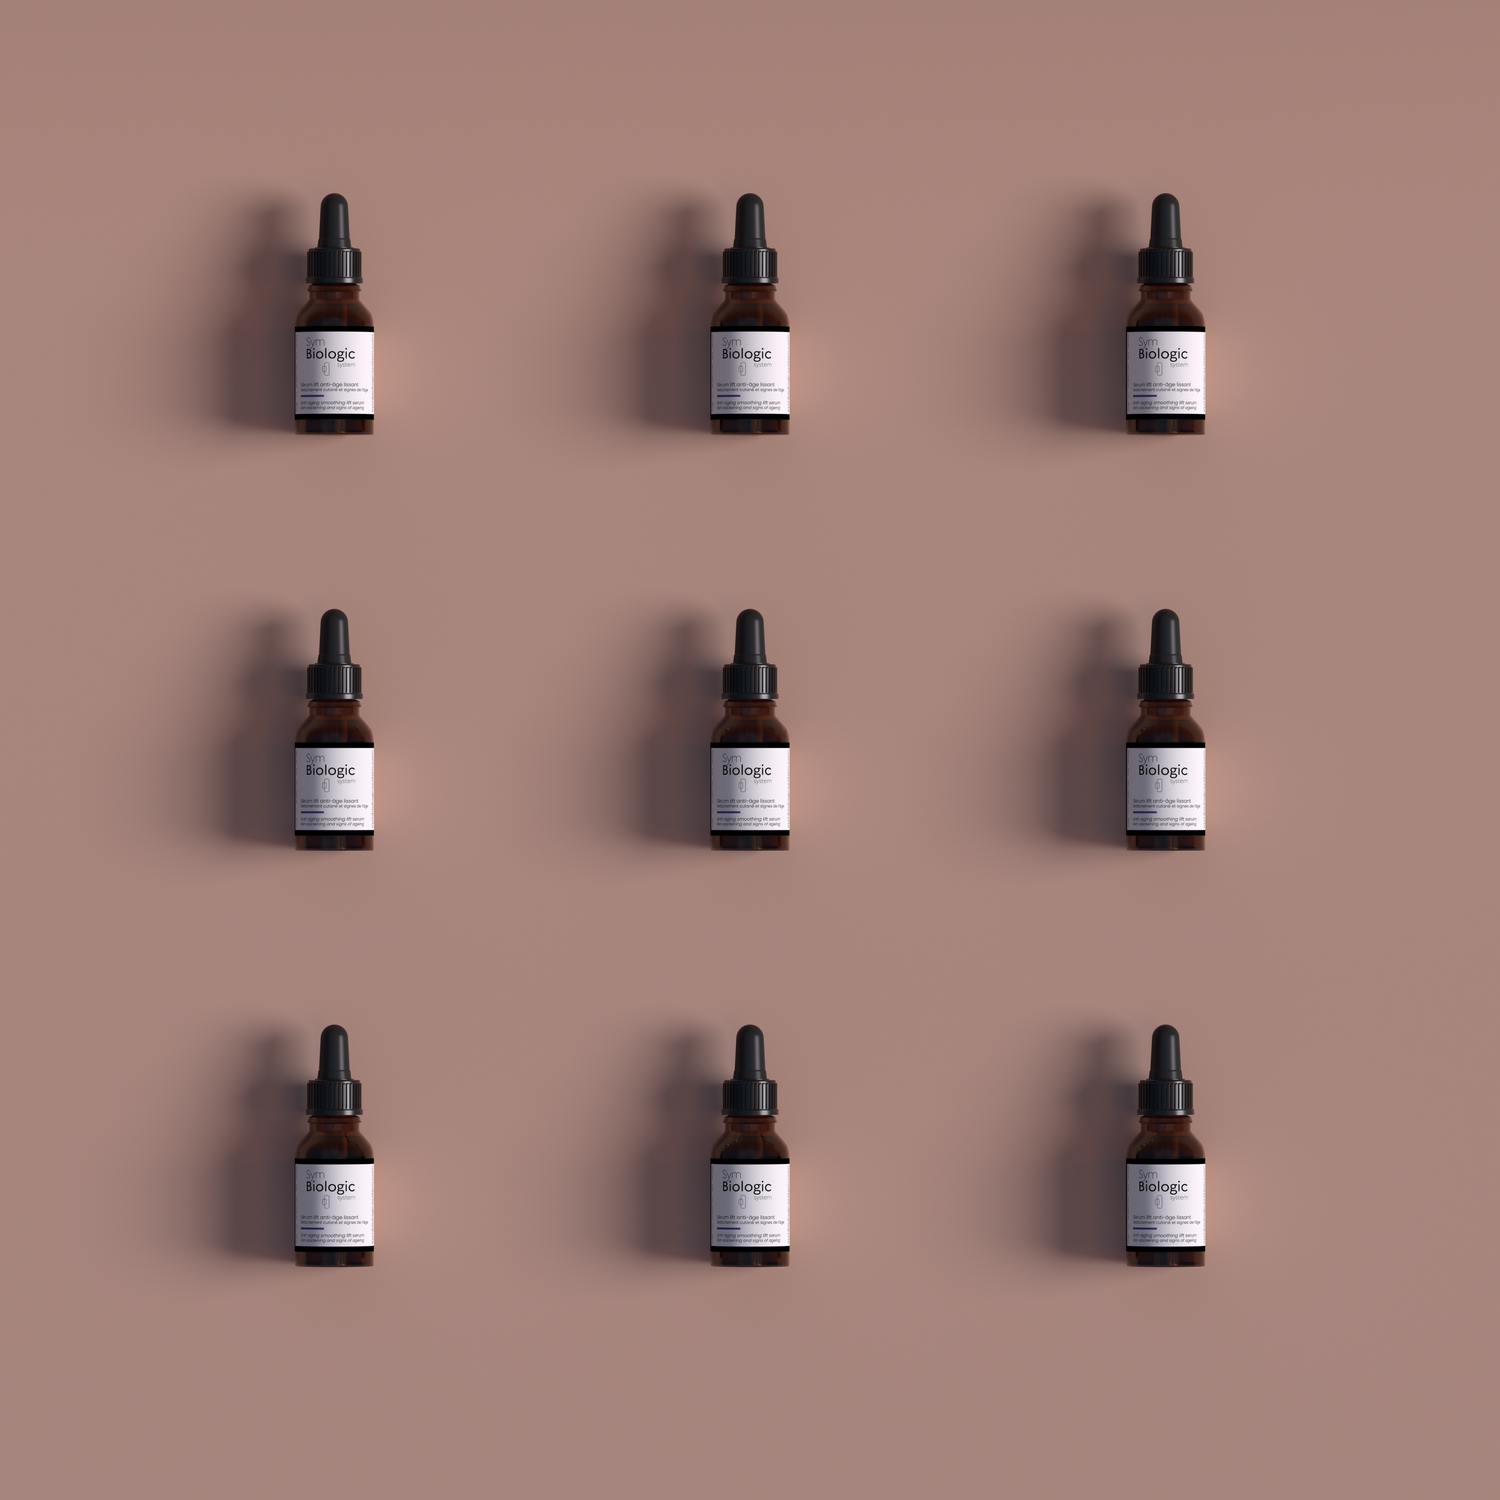 Image of nine Anti-Aging Smoothing Lift Serum bottles displayed in a 3x3 square grid from the front, against a light red backdrop, highlighting the product's elegant packaging and its box.